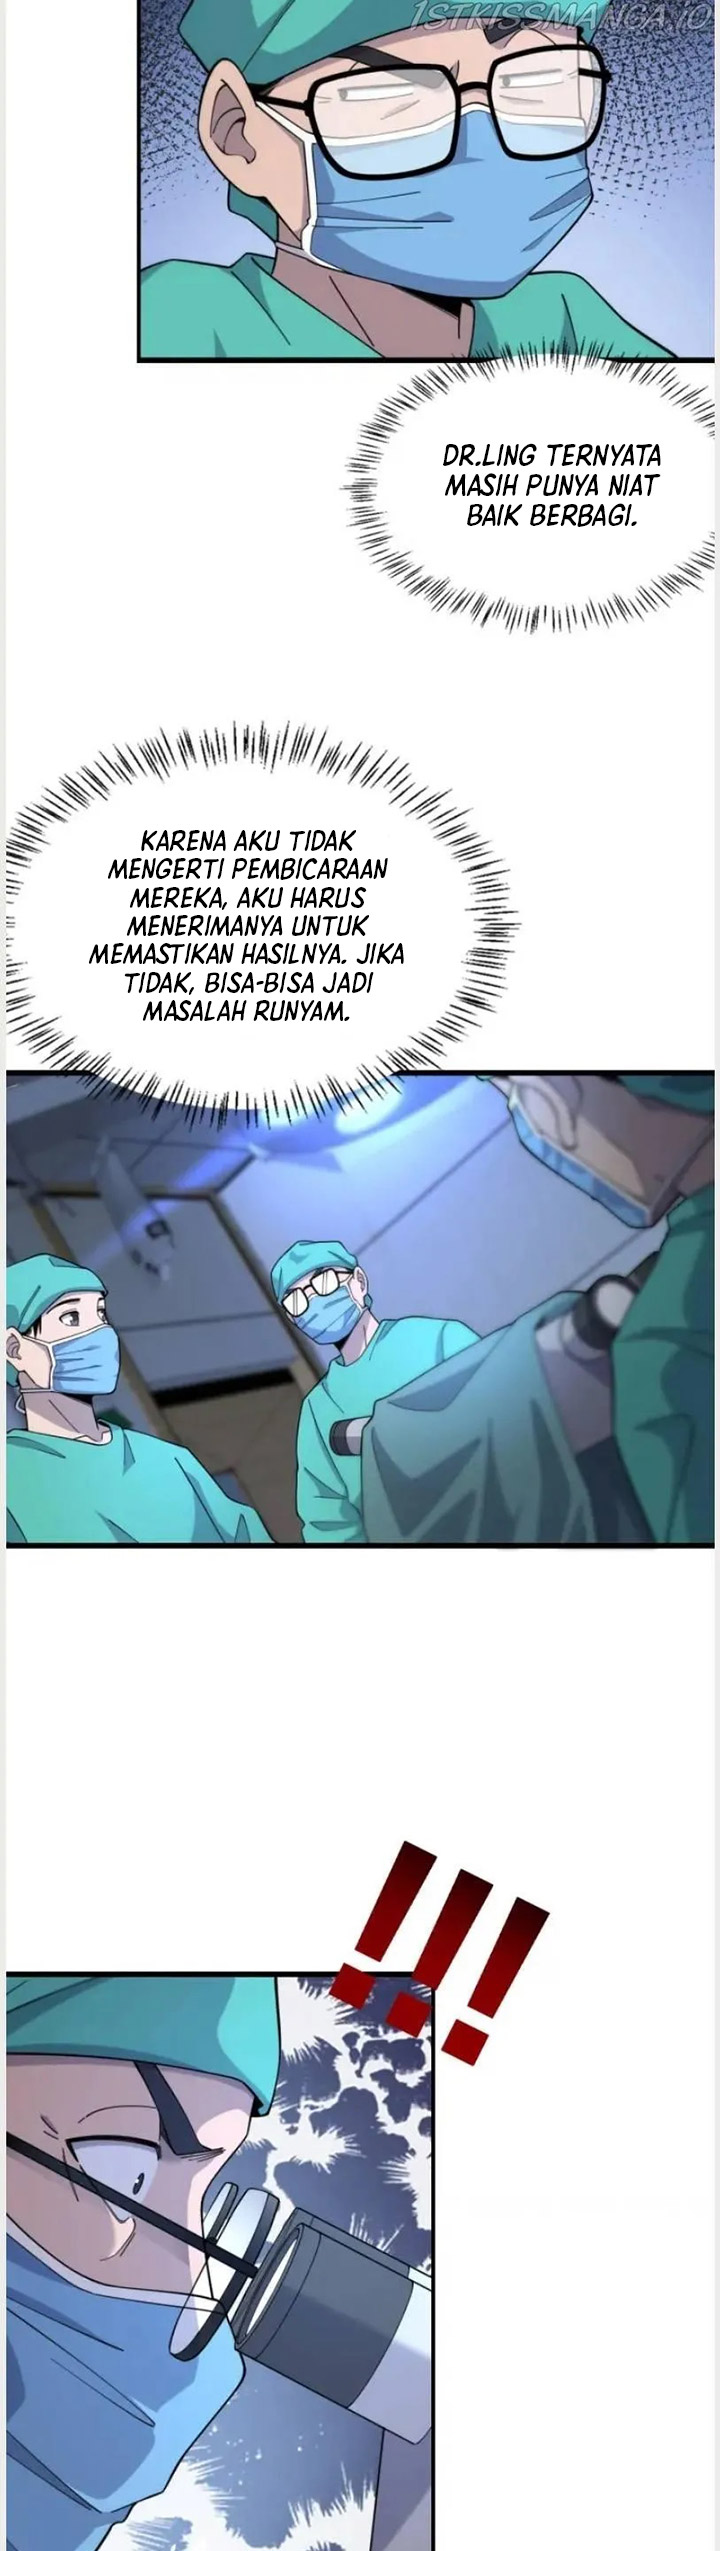 Great Doctor Ling Ran Chapter 72